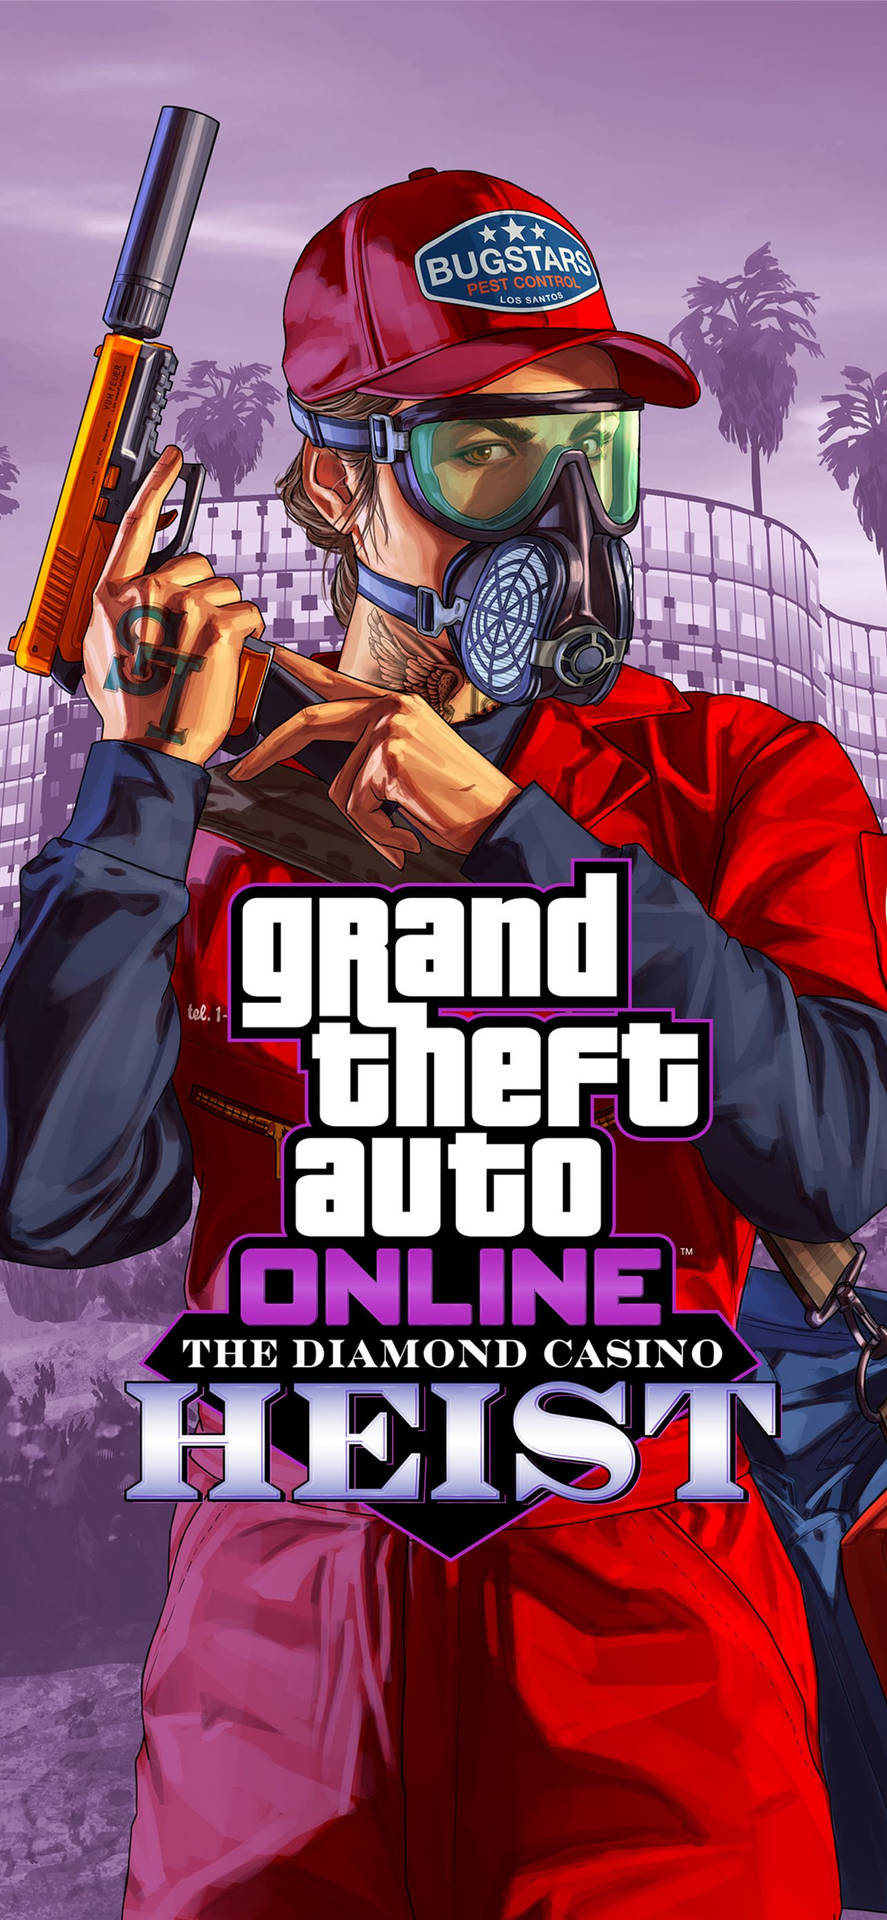 Grand Theft Auto 5 comes to iPhone Wallpaper